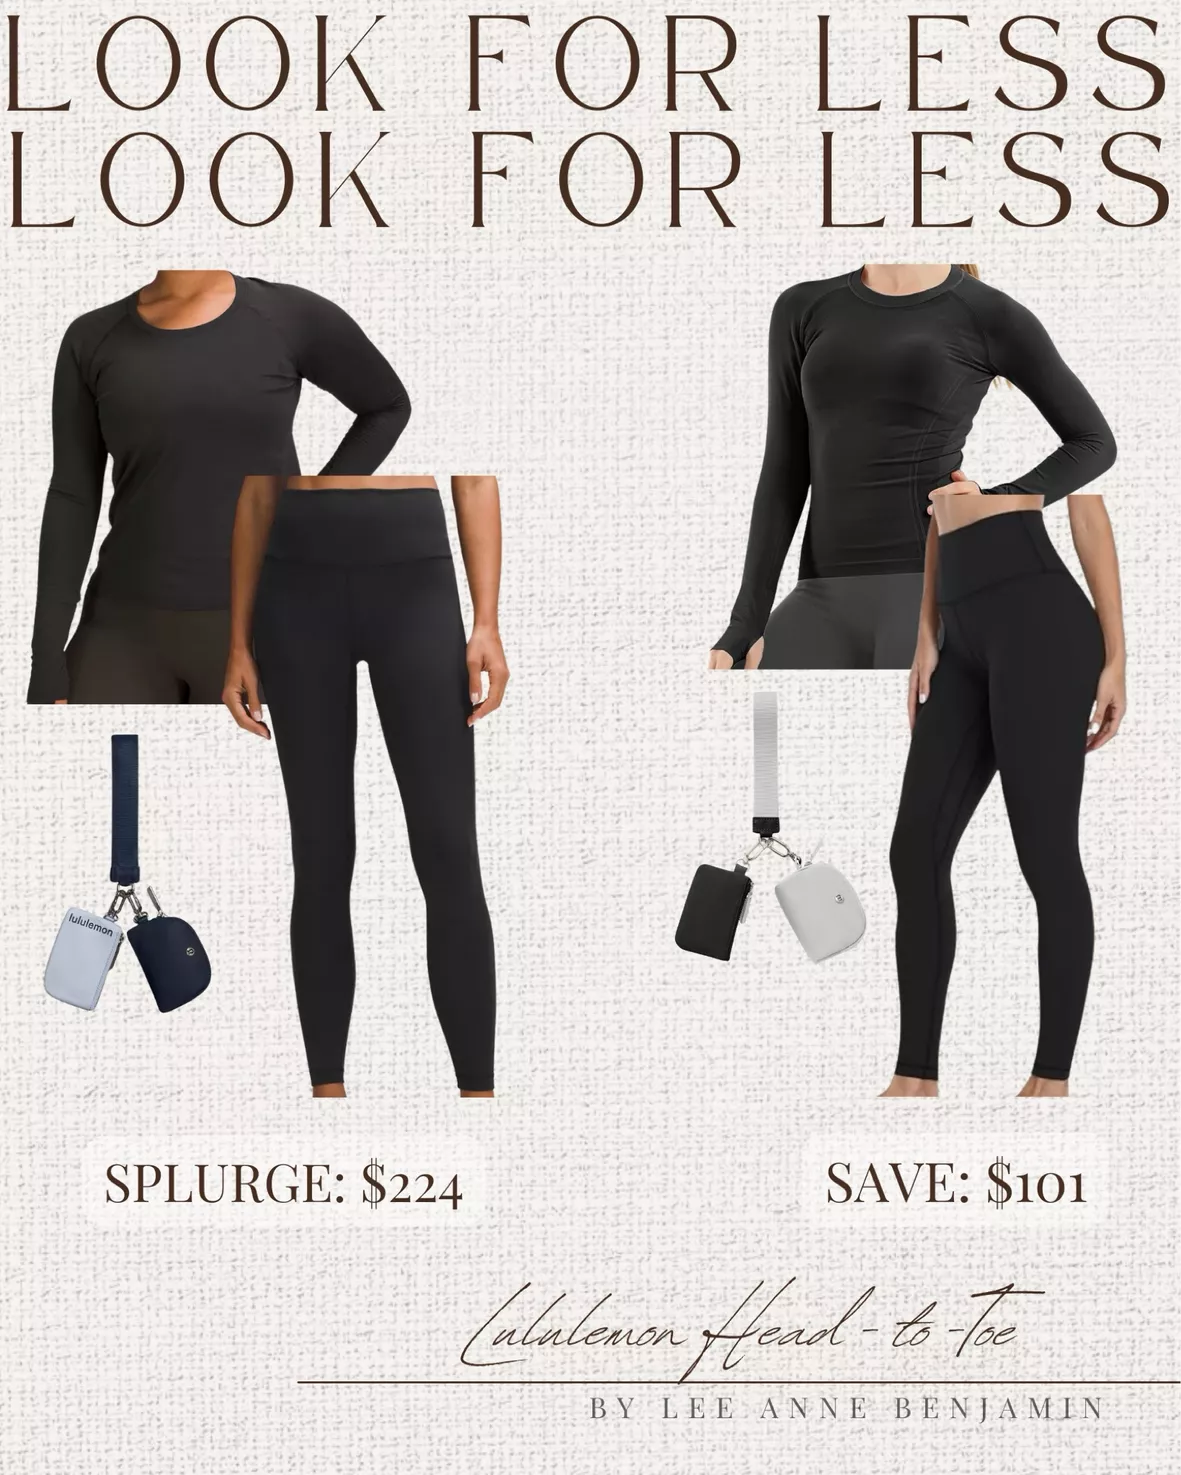 My Favorite  Designer Look for Less - Life By Lee